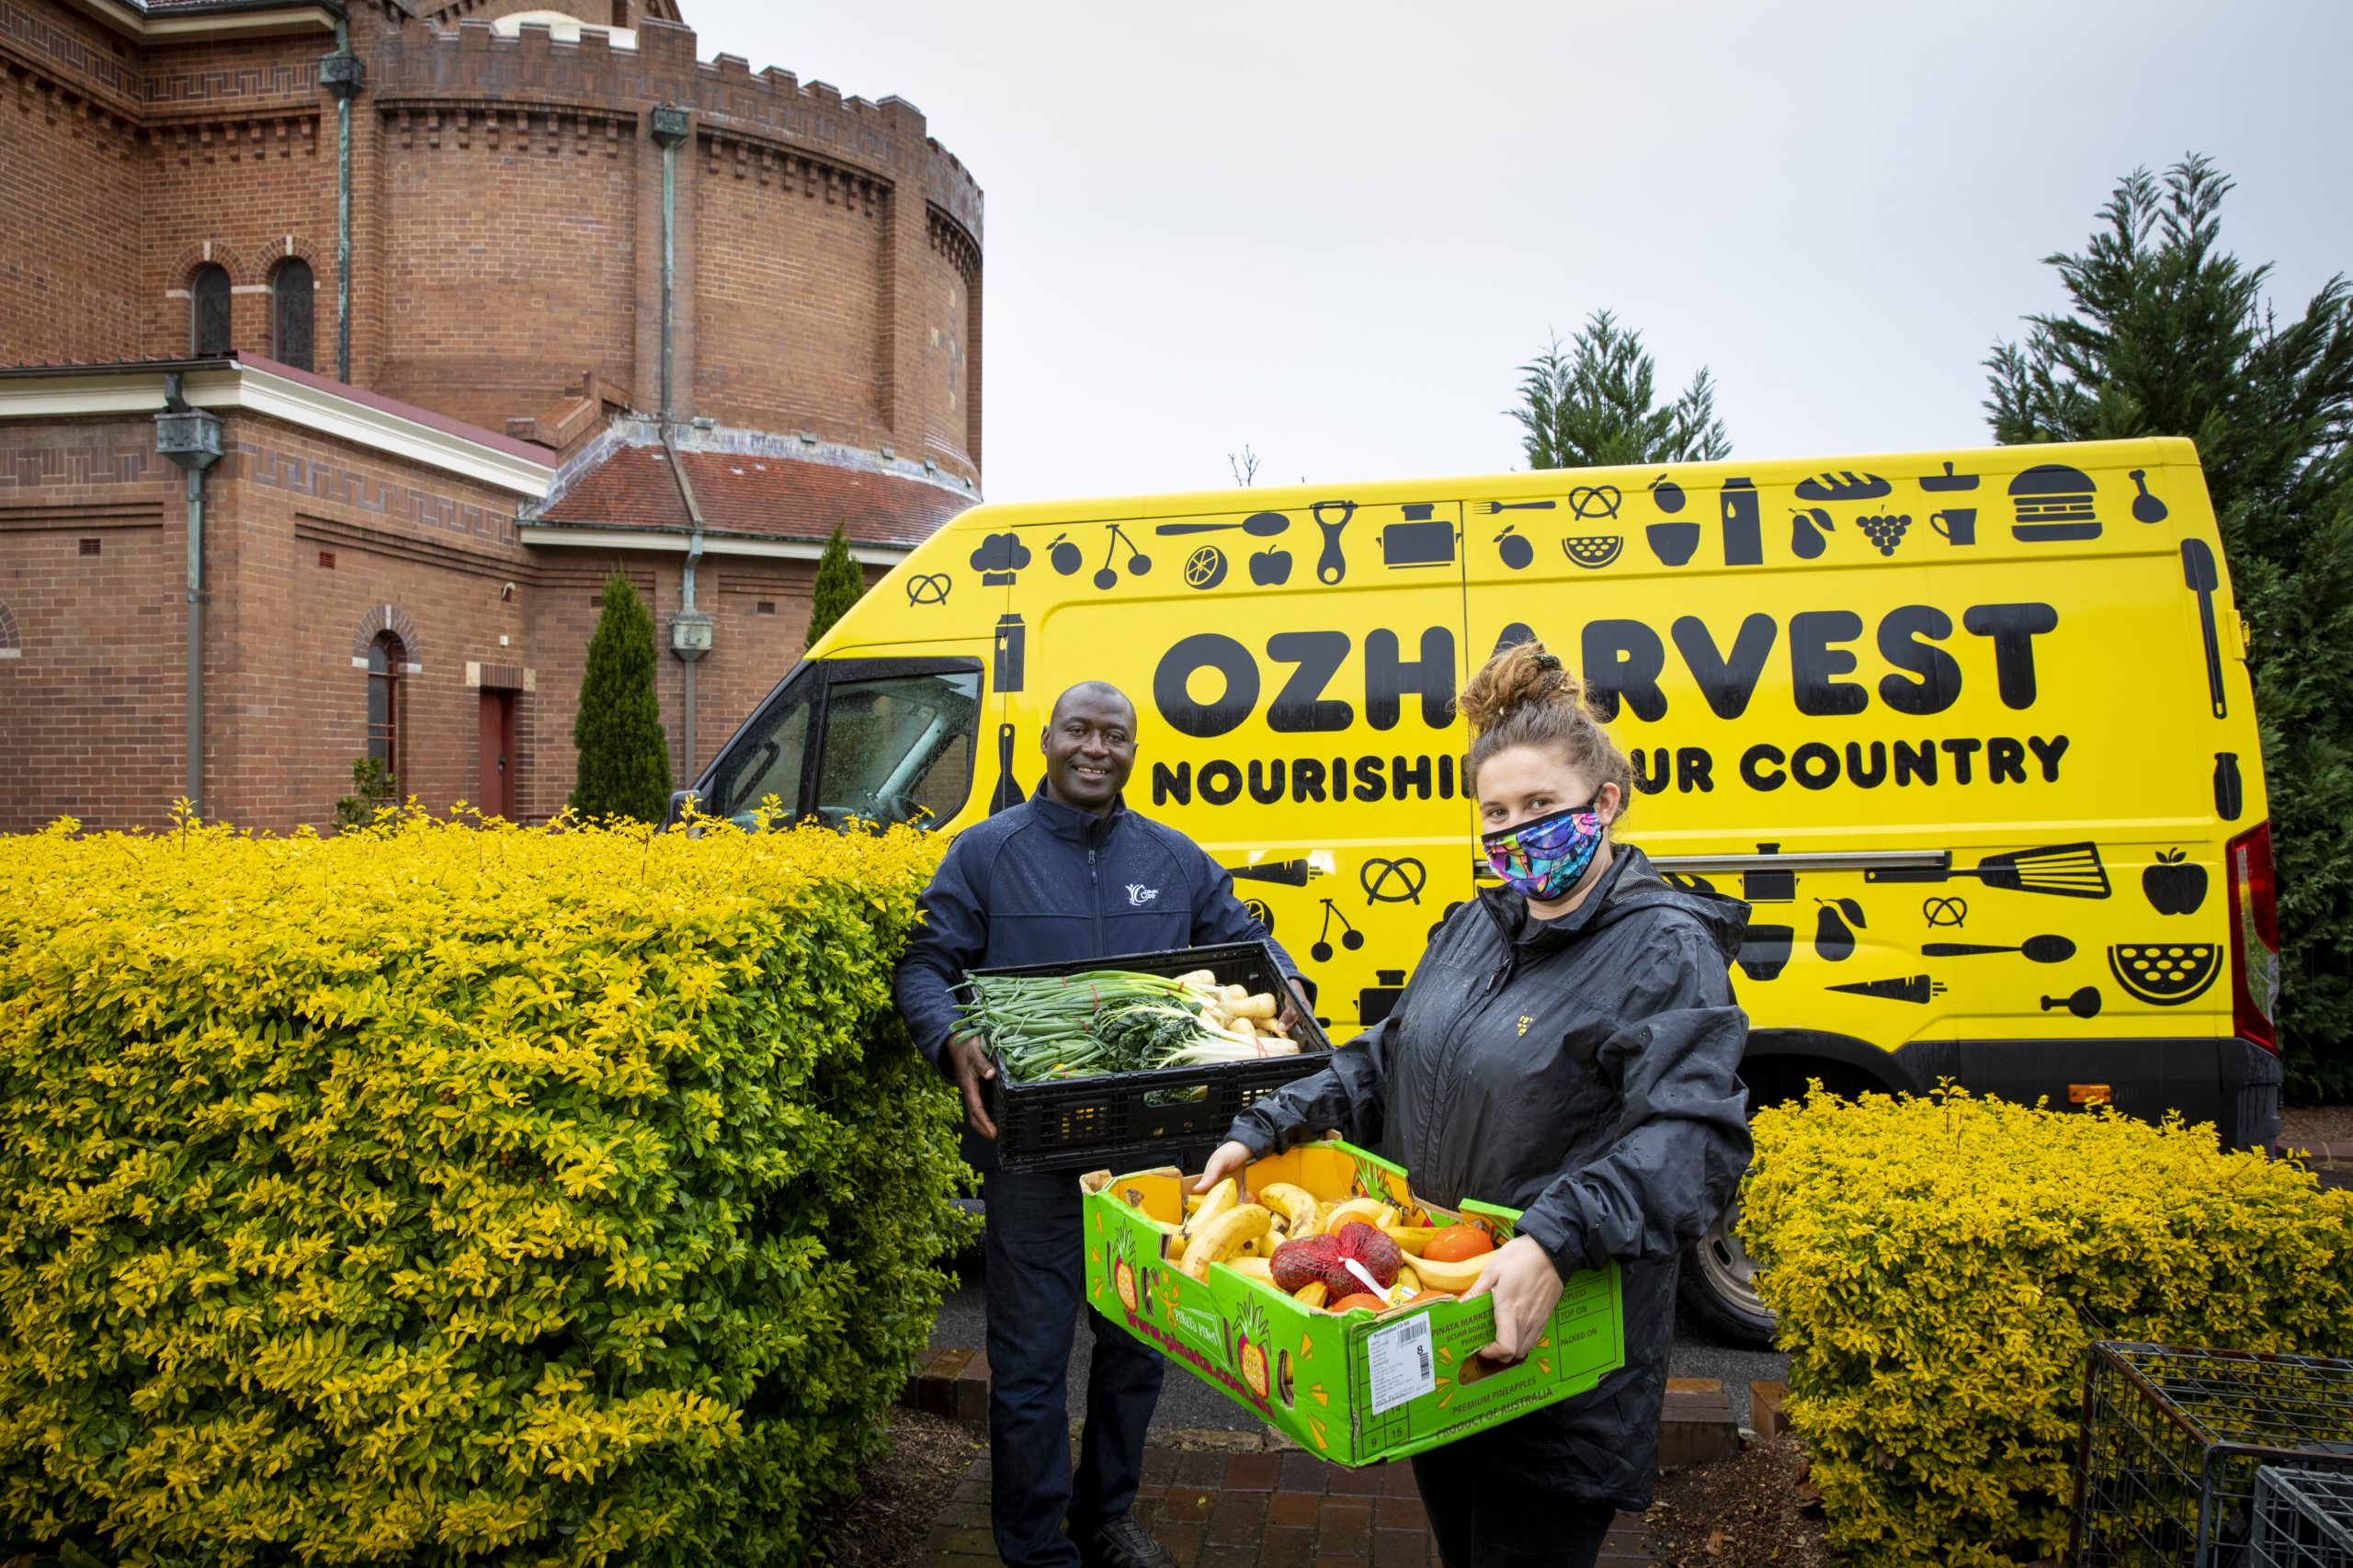 Ozharvest Newcastle delivers to charity DARA